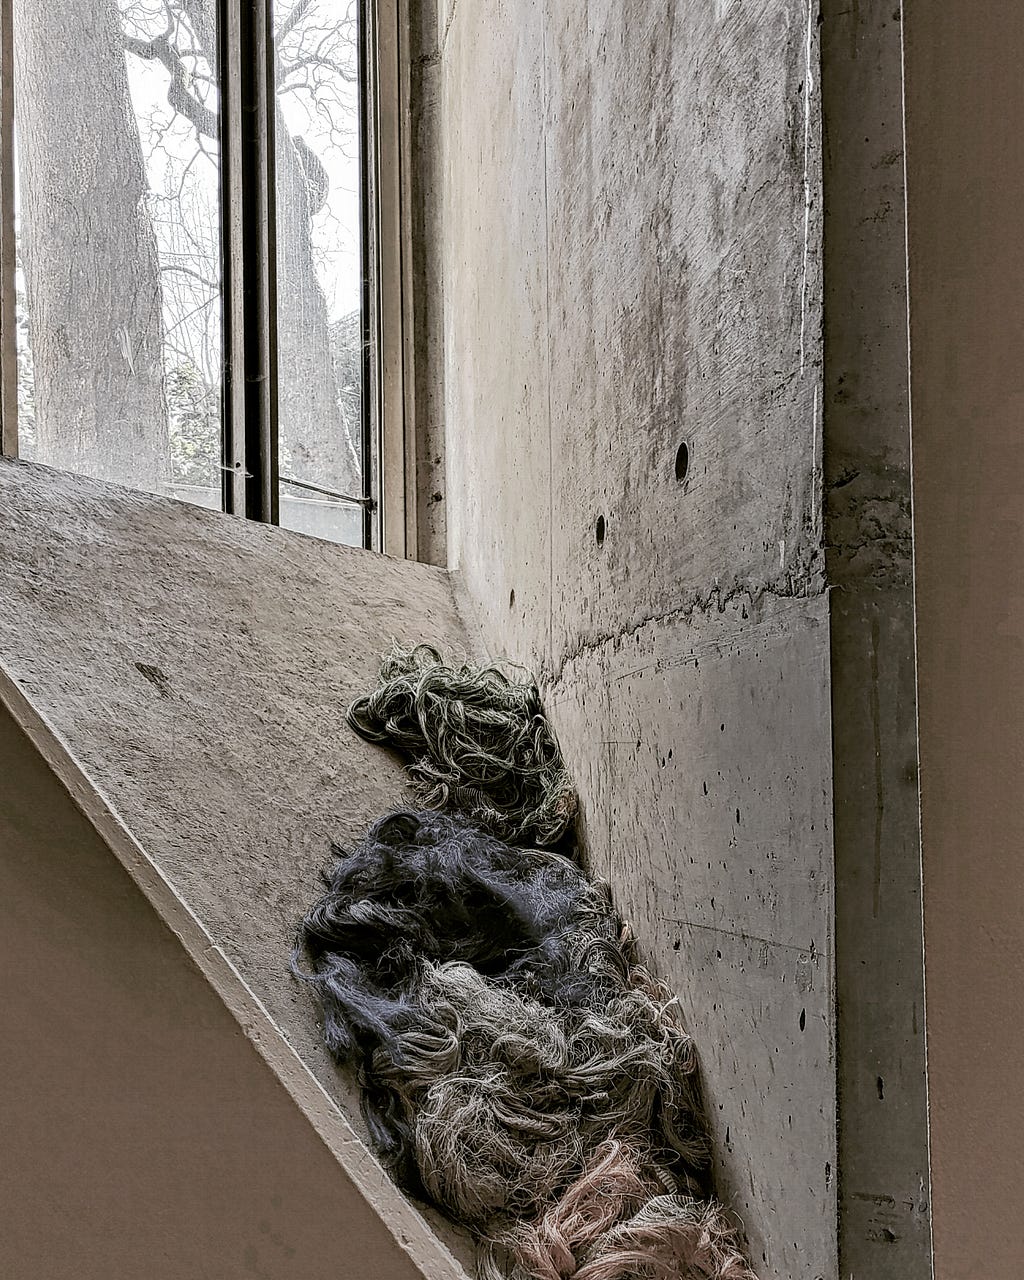 Clumps of frayed fabric lie on a concrete window sill